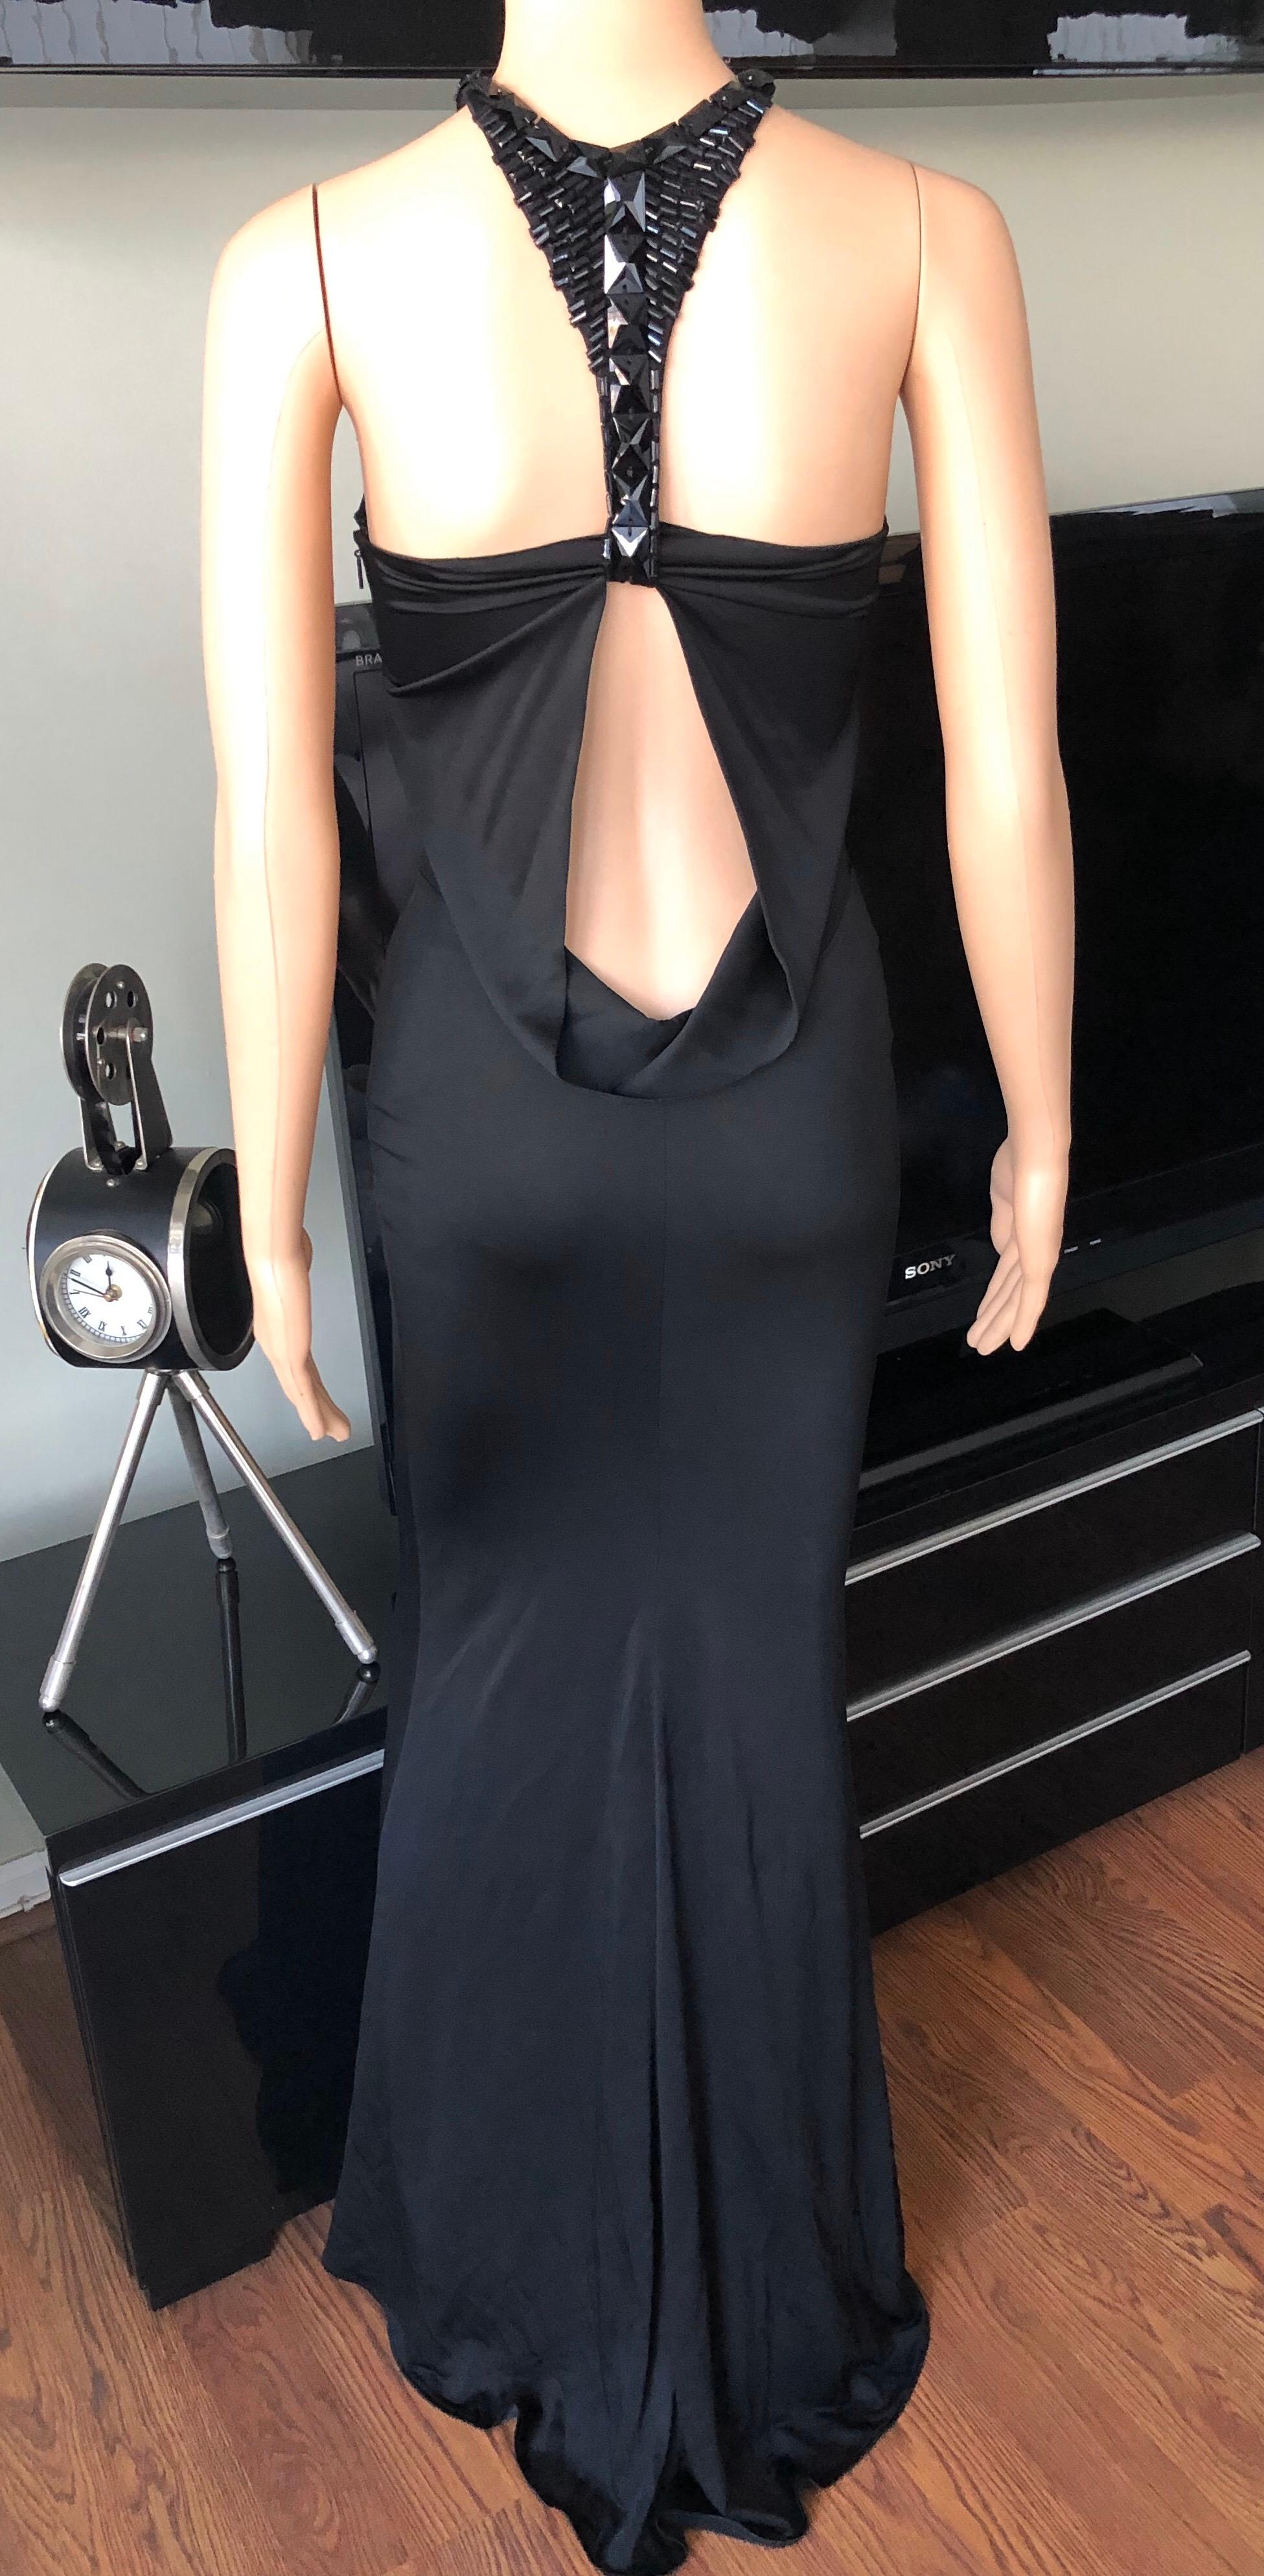 Tom Ford for Gucci F/W 2004 Embellished Plunging Cutout Black Evening Dress Gown For Sale 1